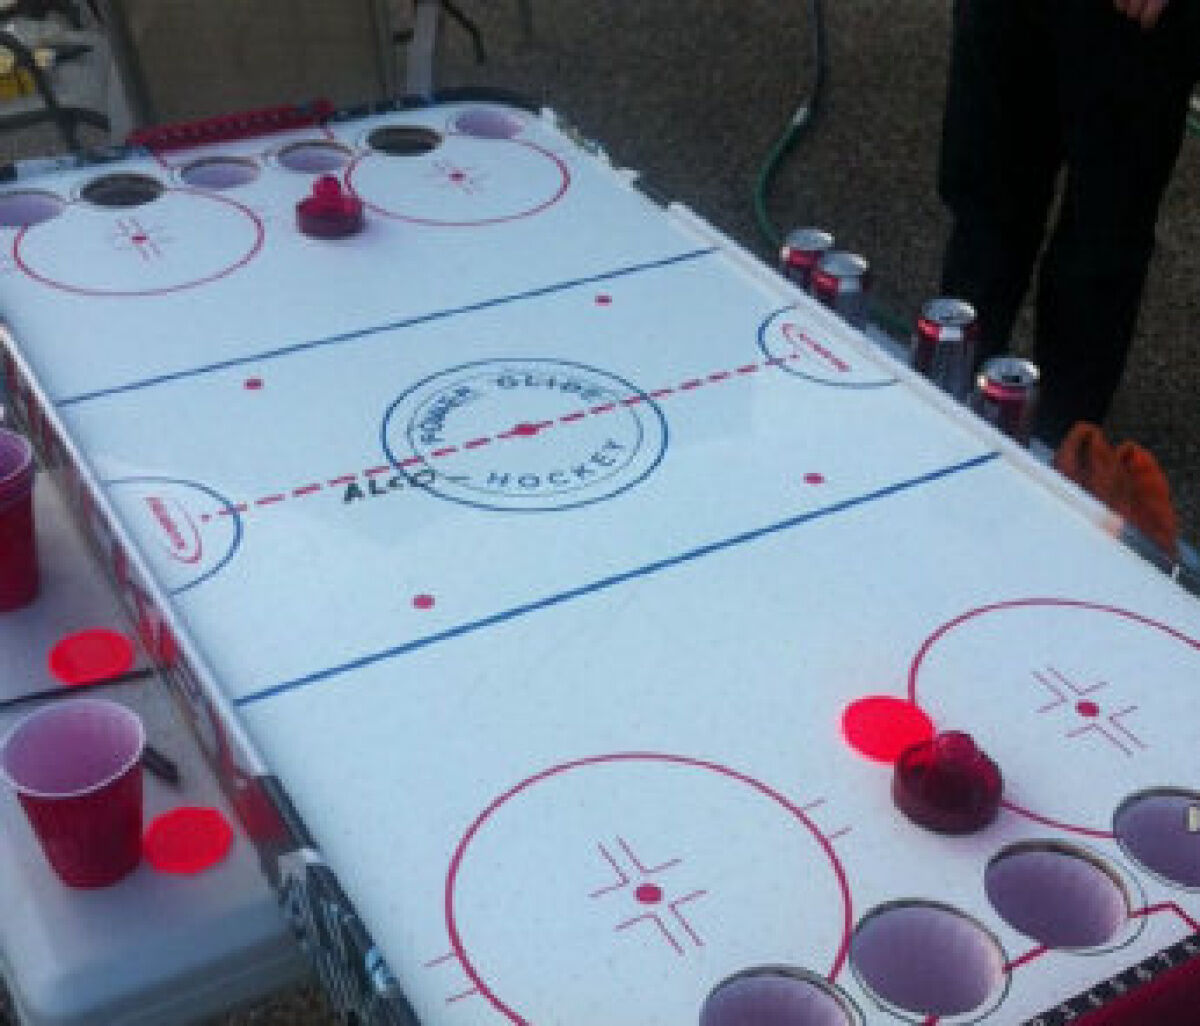 Alcohockey drinking game puts uniquely Canadian spin on beer pong